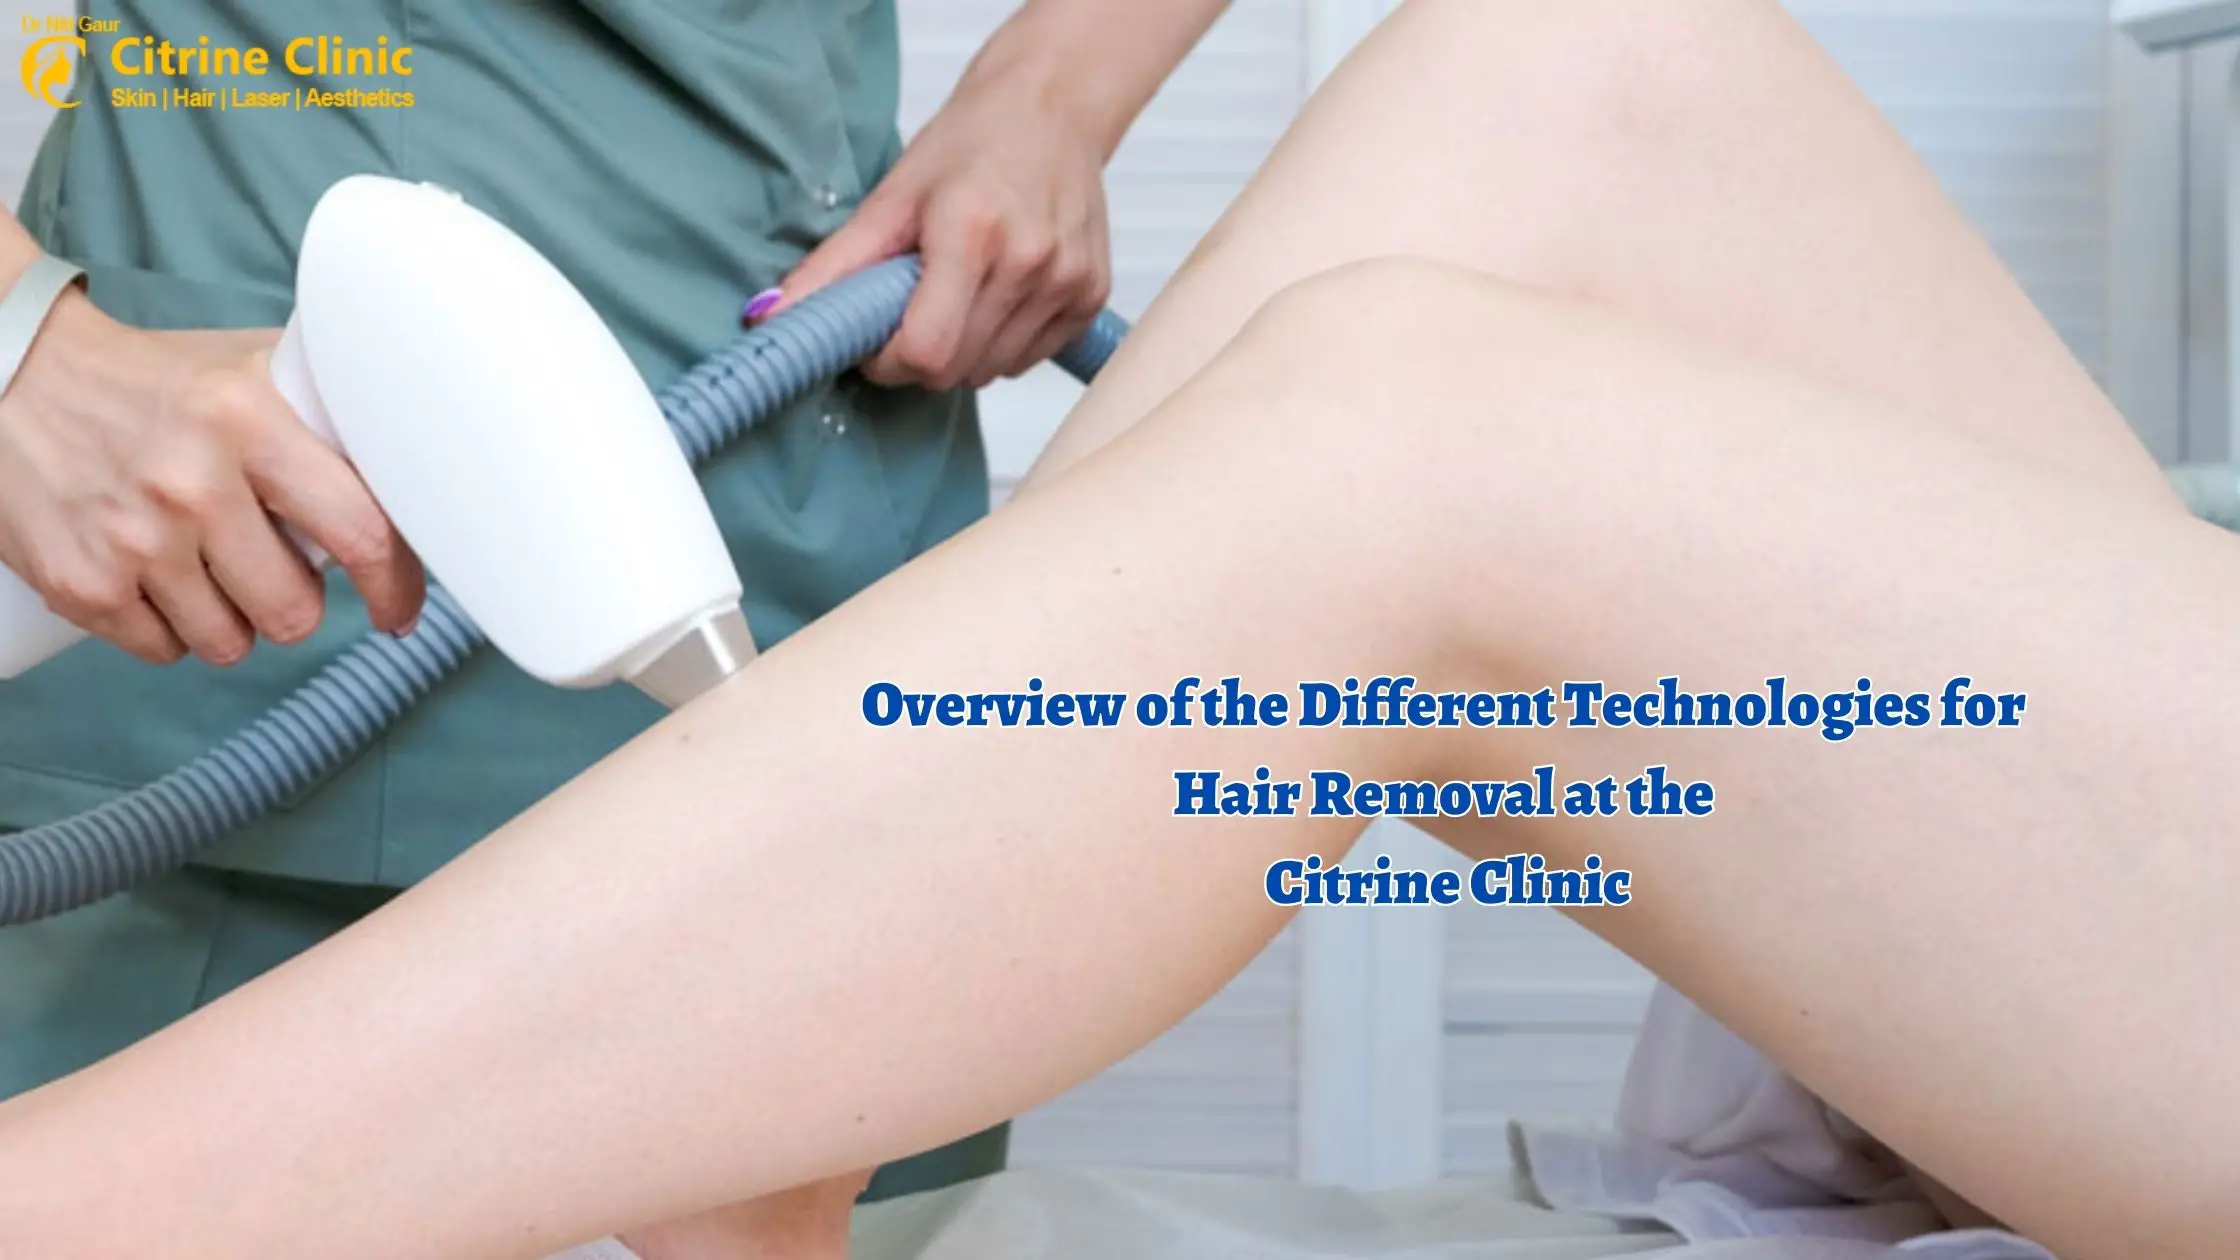 Overview of the Different Technologies for Hair Removal at the Citrine Clinic